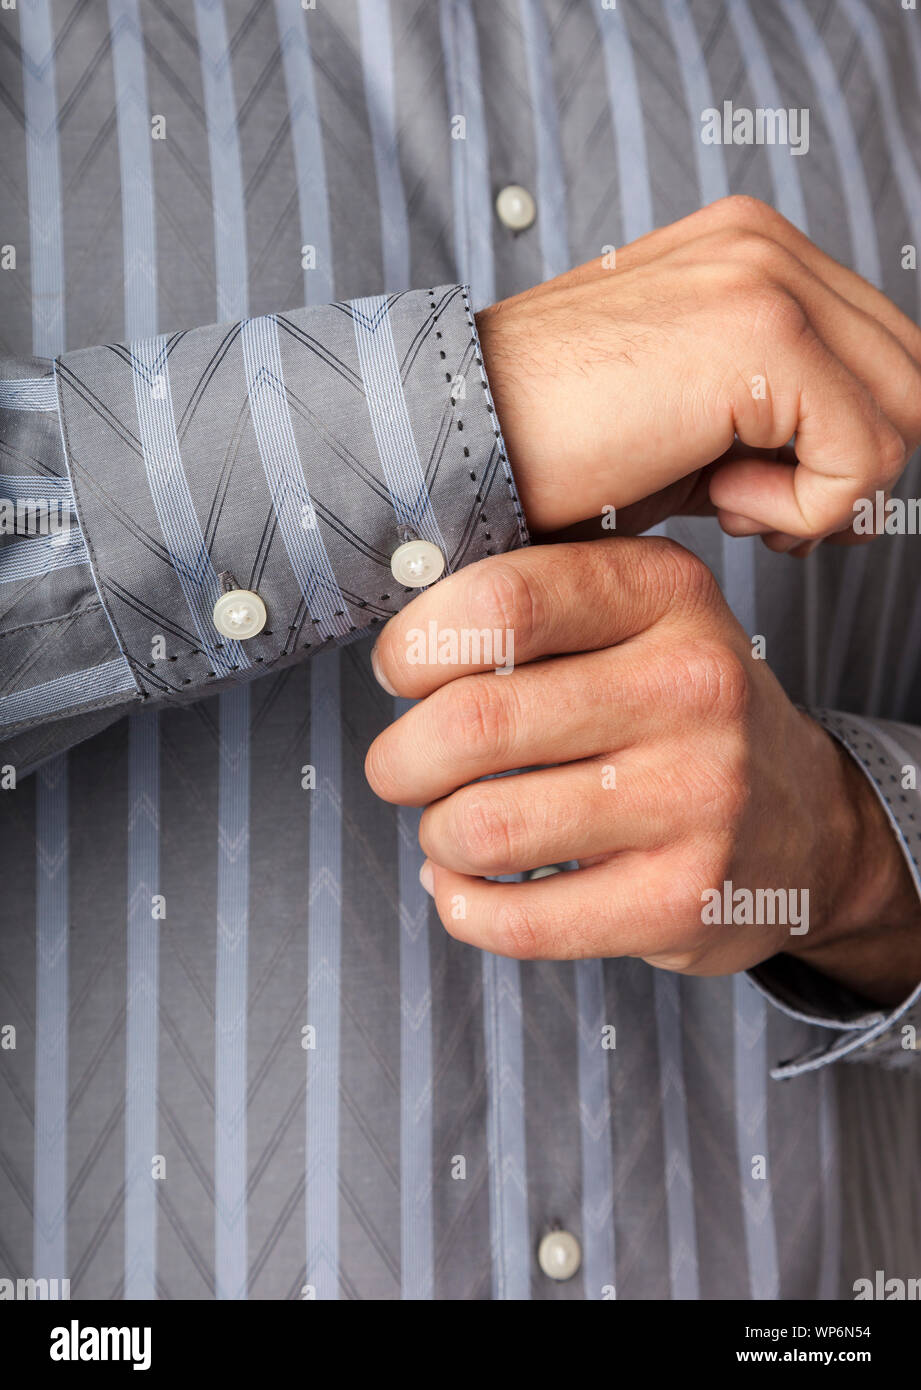 Close up detail of man's hands buttoning shirt cuffs. Men's clothing styles. Stock Photo